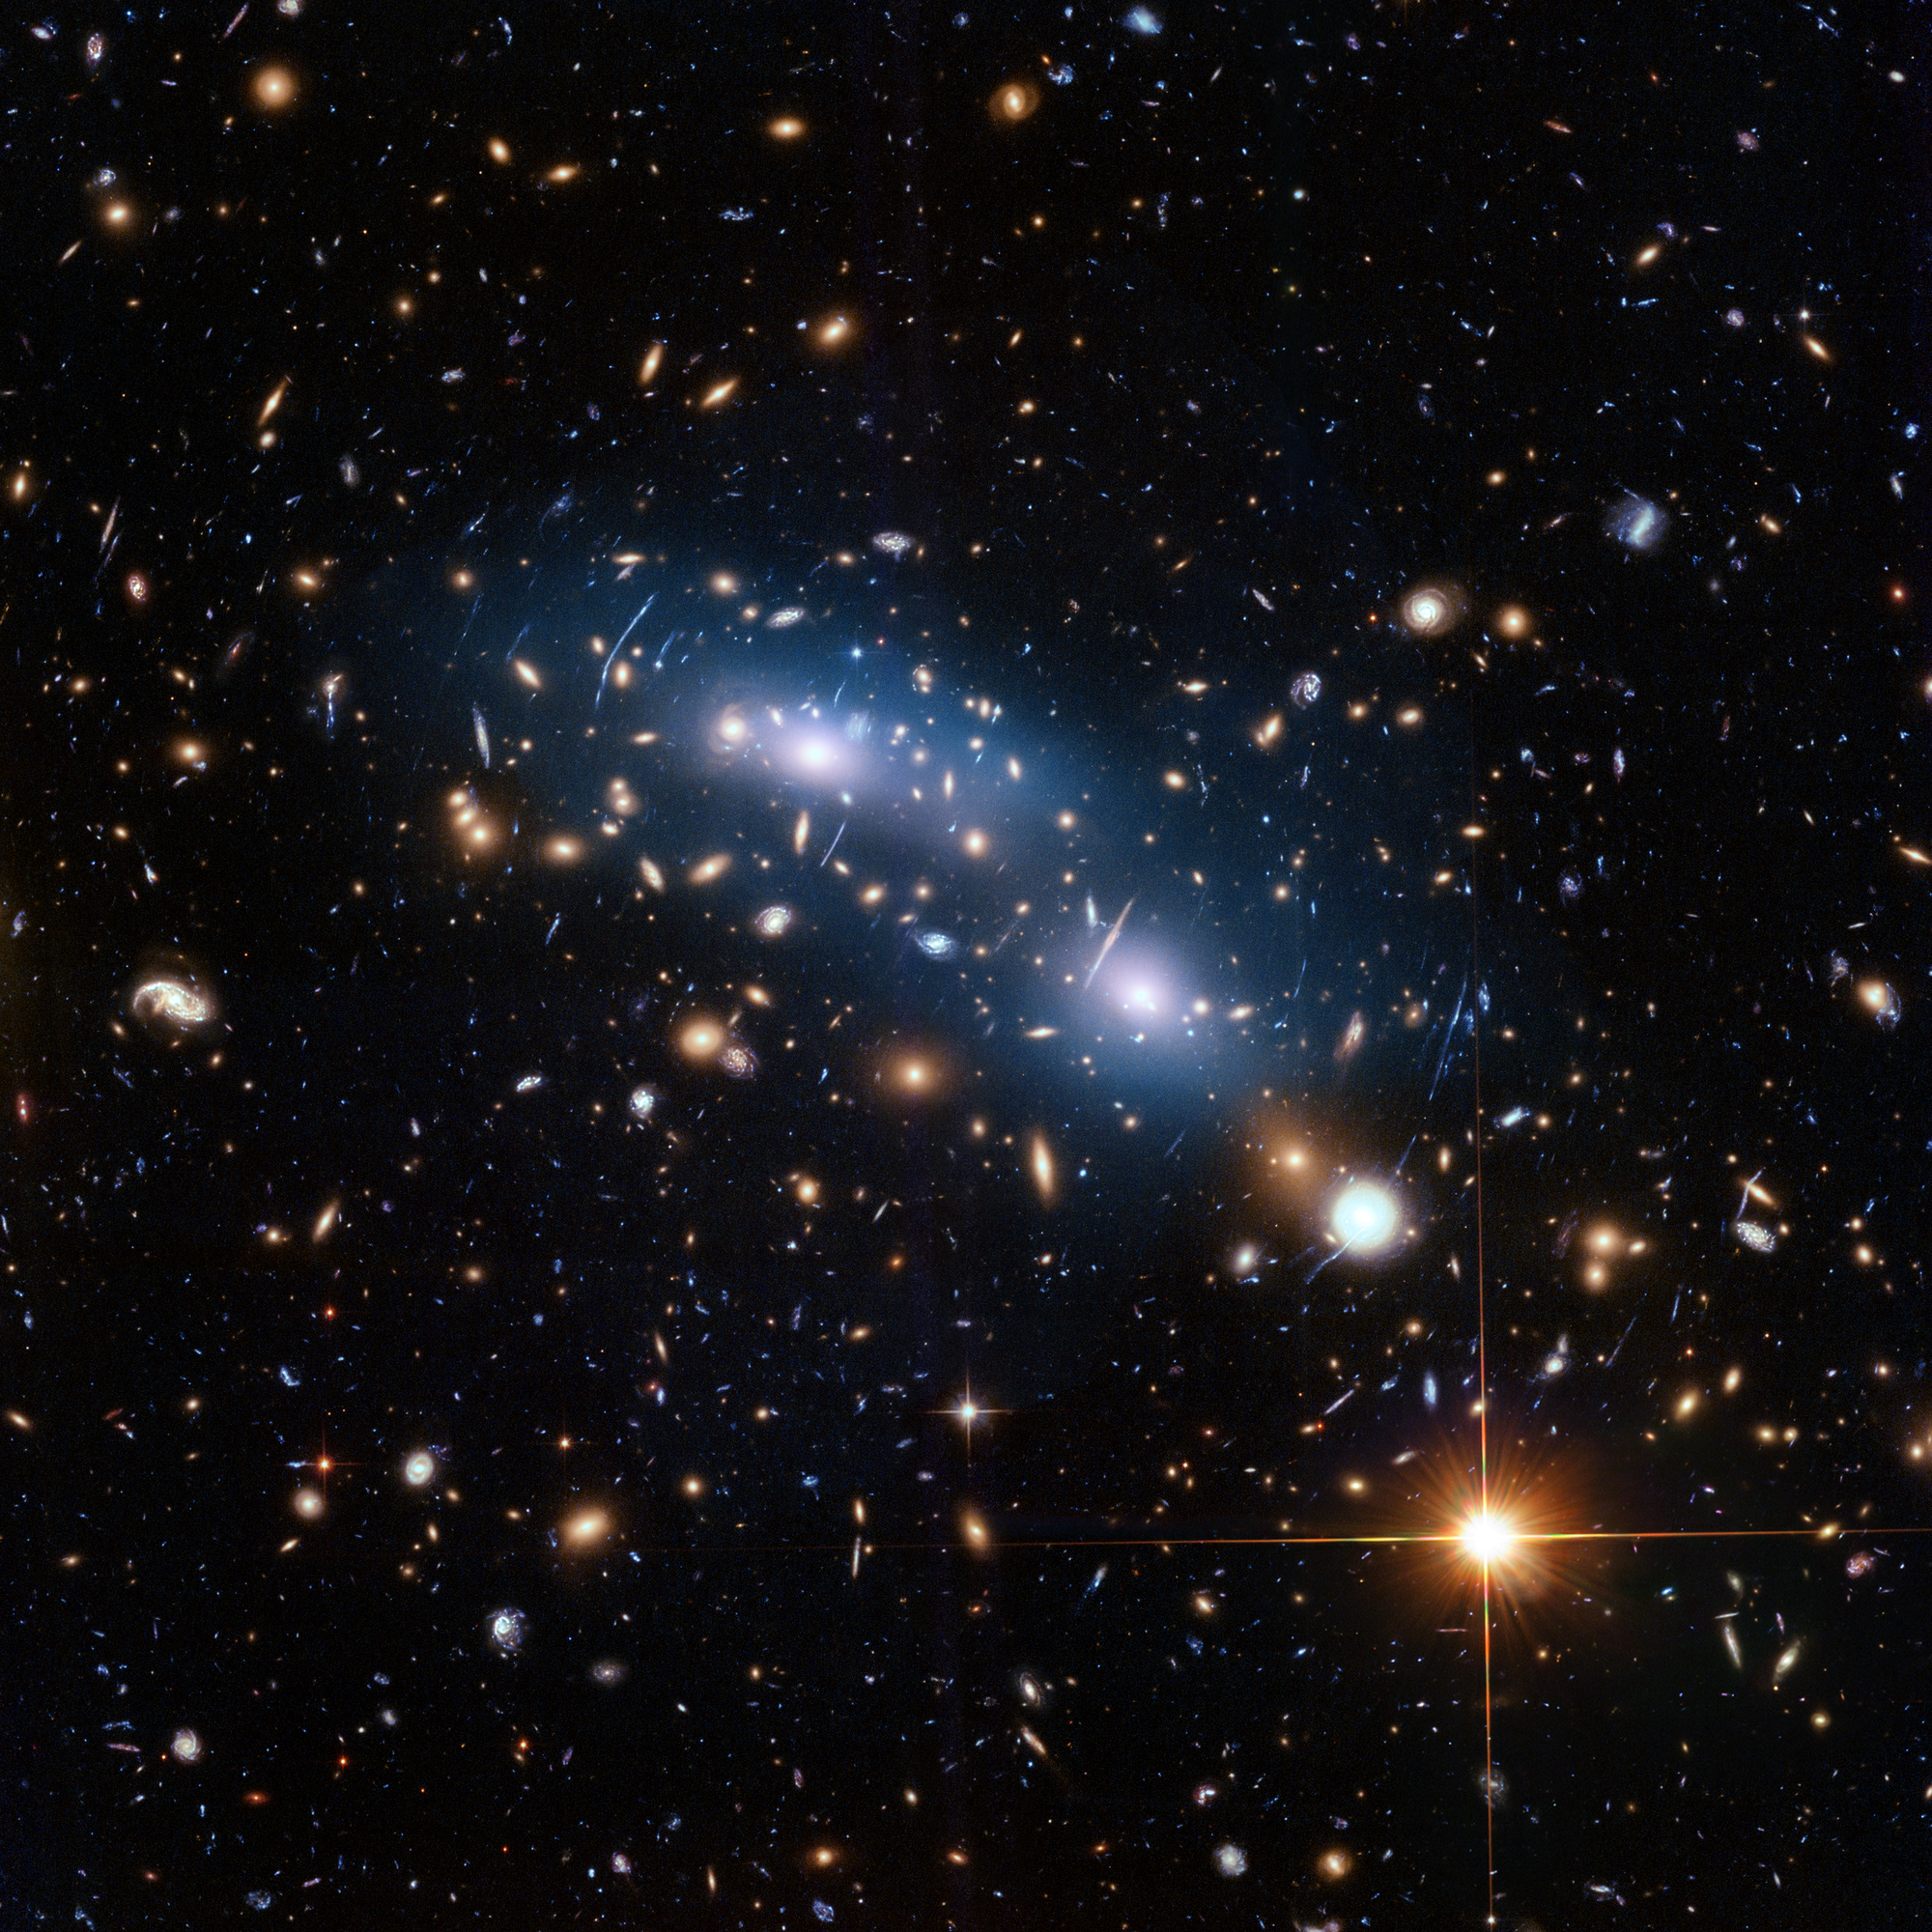 smaller cluster of galaxies bathed in blue